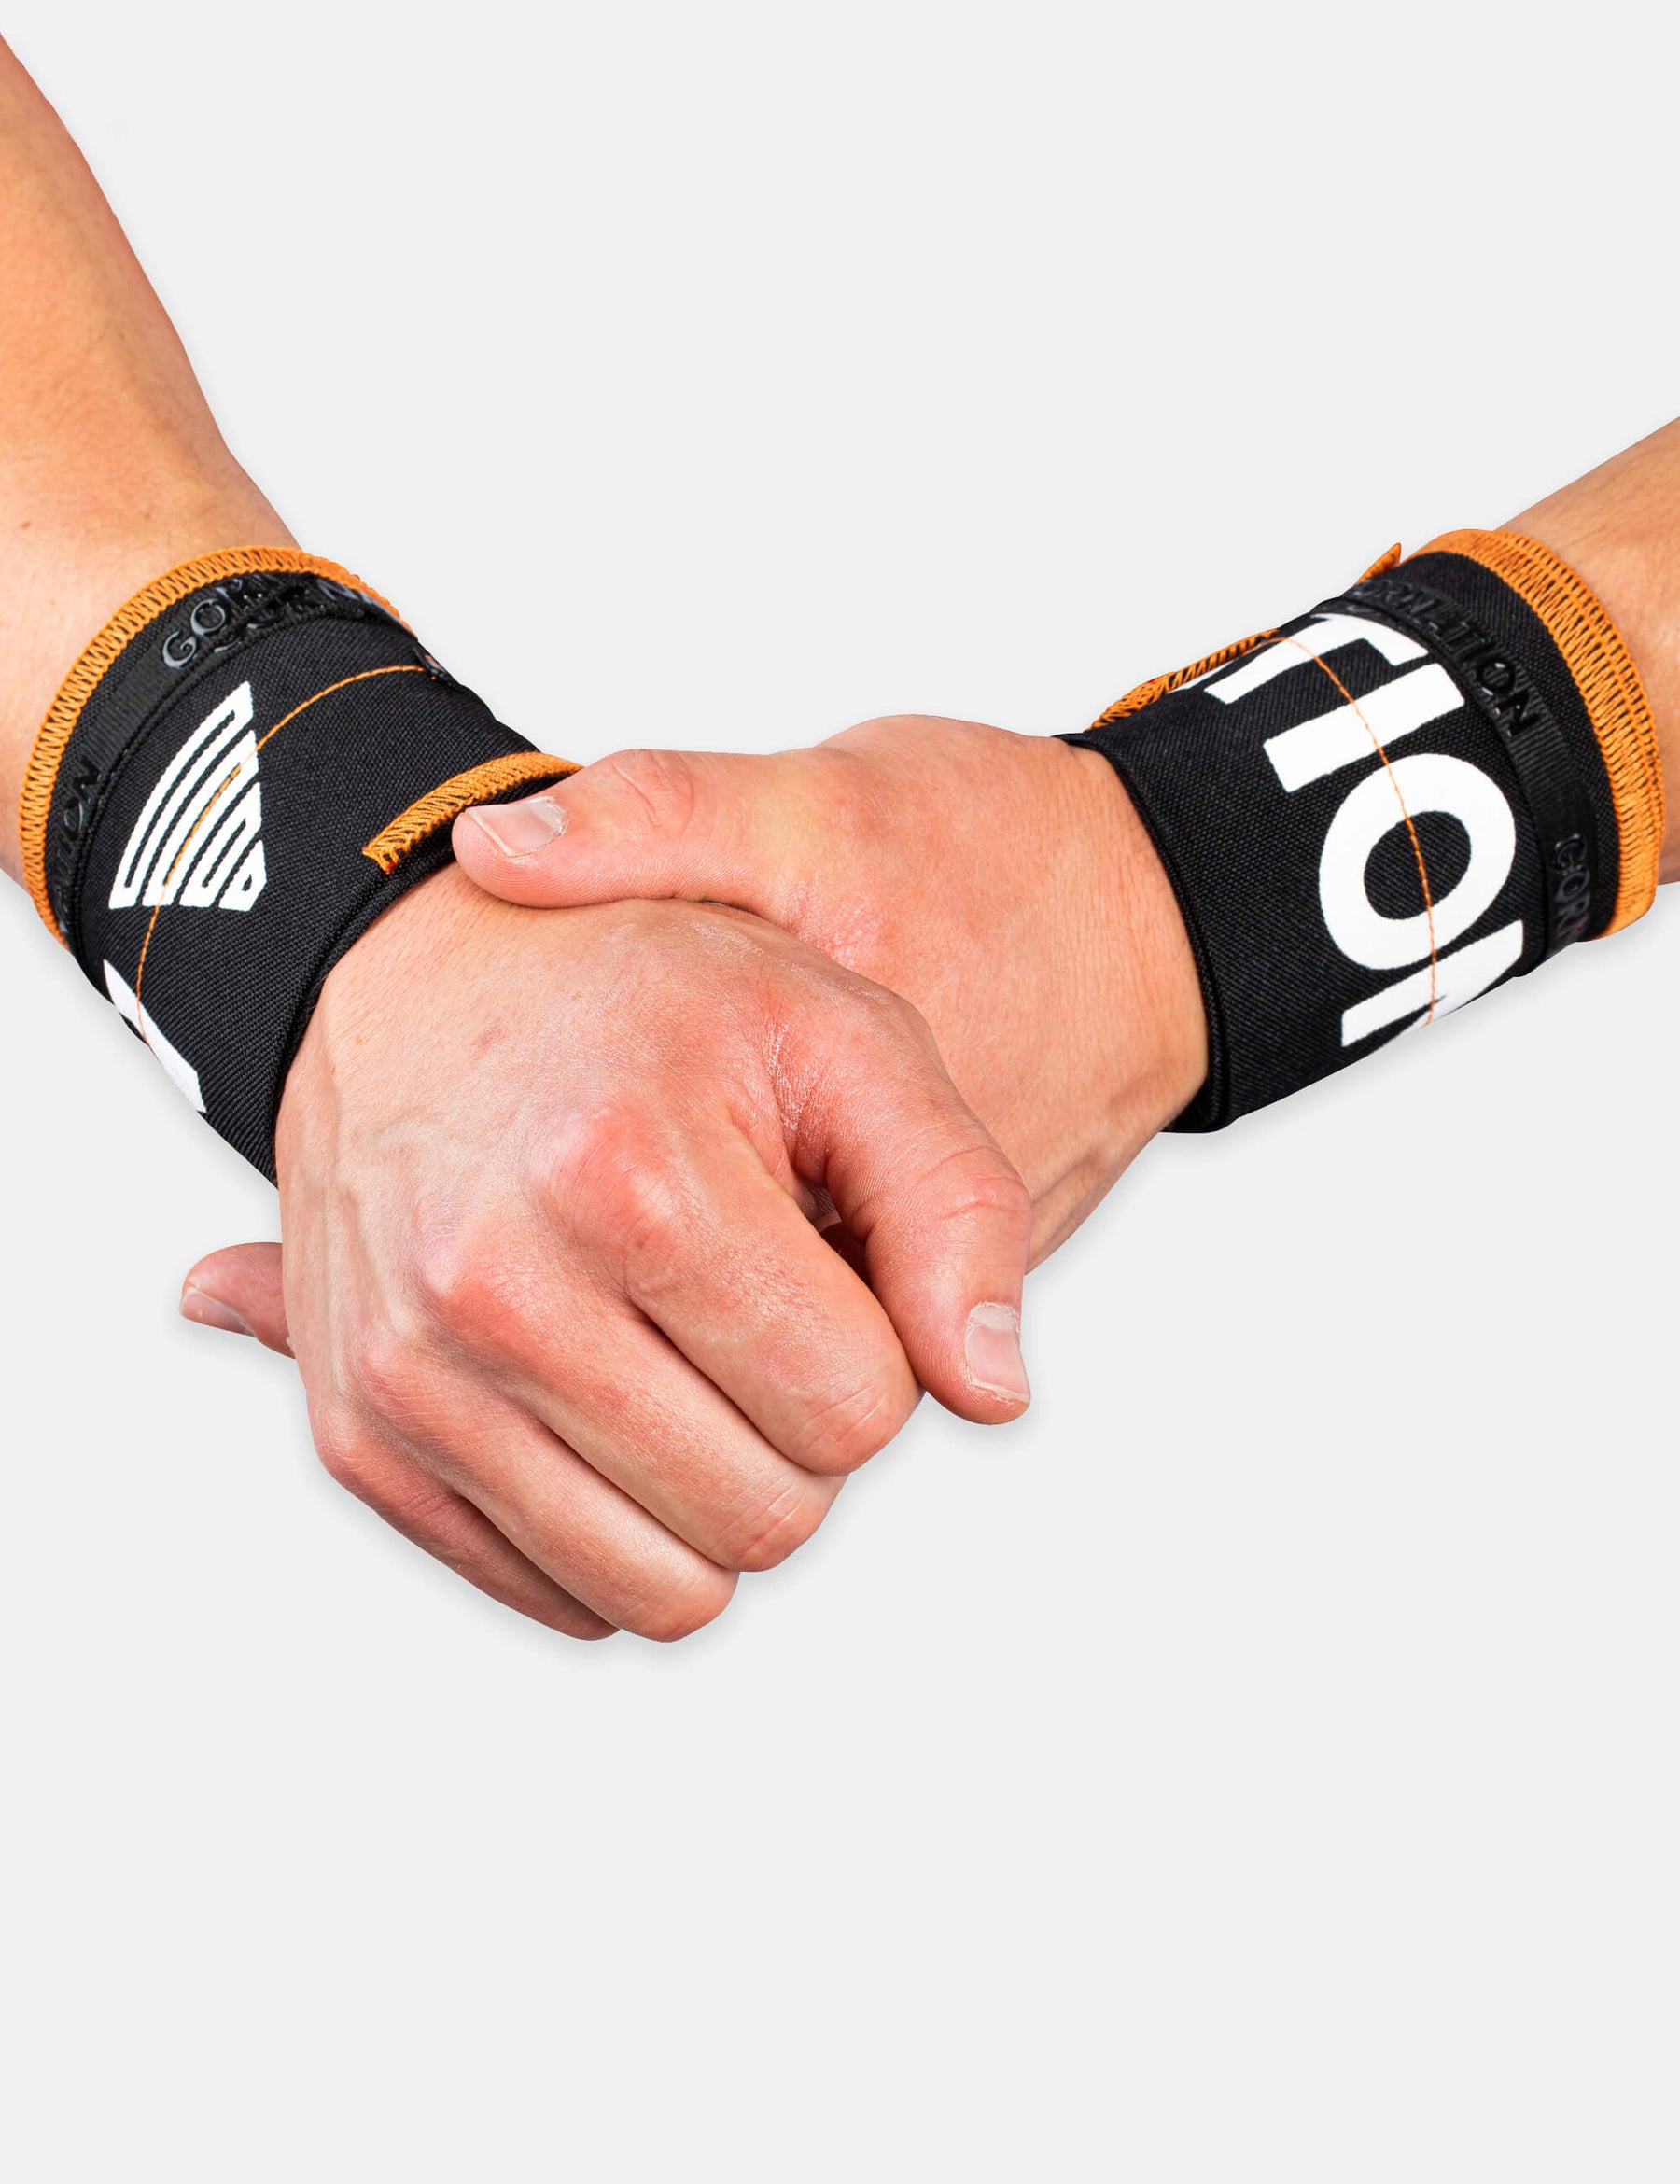 Black-Orange Gornation Wrist wraps with tight fit, adjustable wristband for wrist support and injury prevention